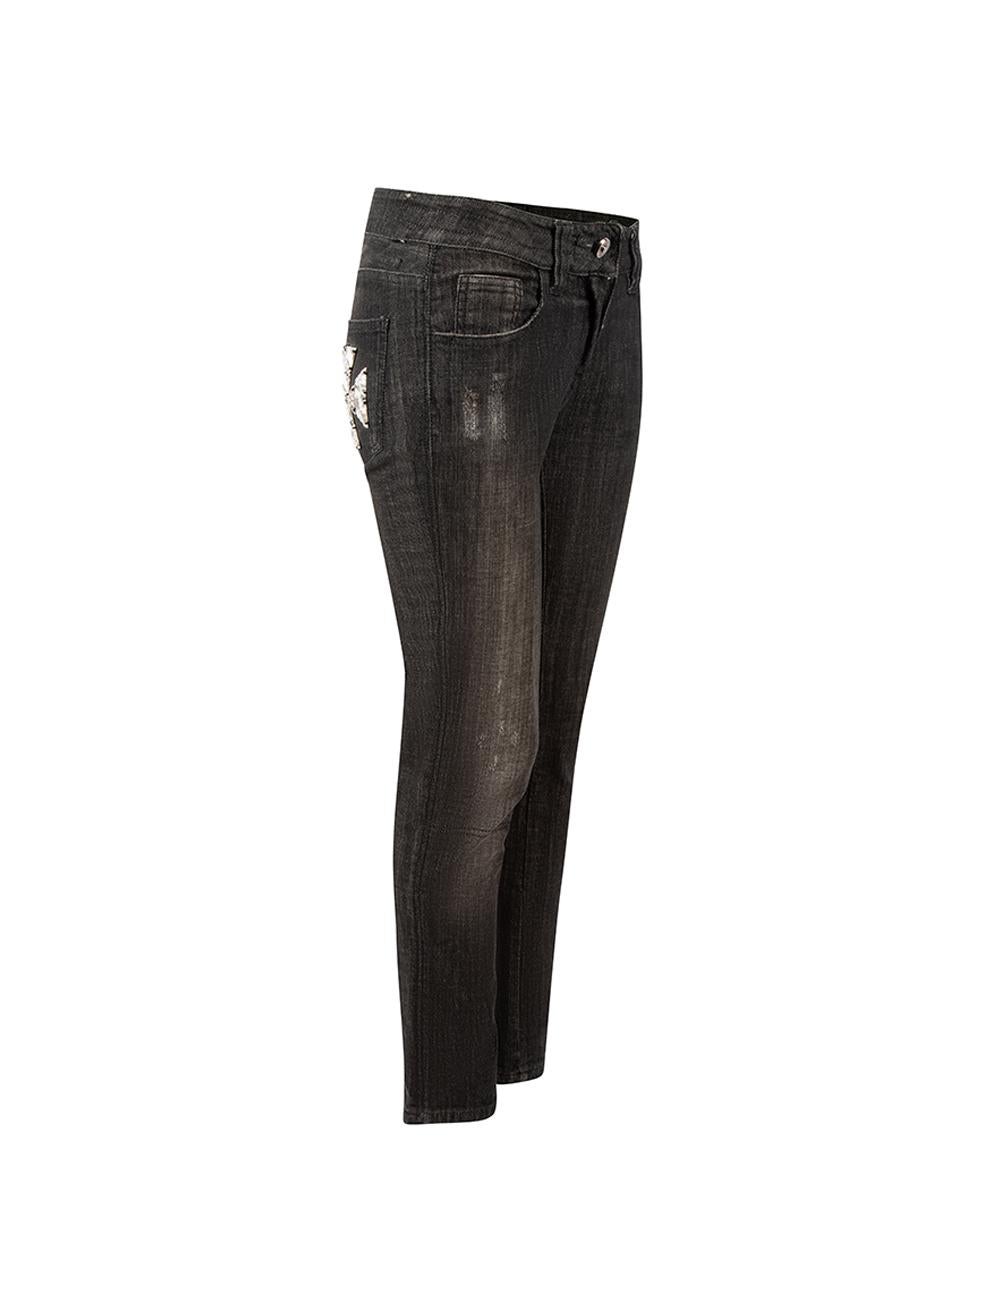 CONDITION is Very good. Minimal wear to jeans is evident. Minimal wear to the zipper and buttons which are a little tarnished. There is also scuffs to the plaque at the back of jeans on this used Philipp Plein designer resale item. 
 
 Details
 